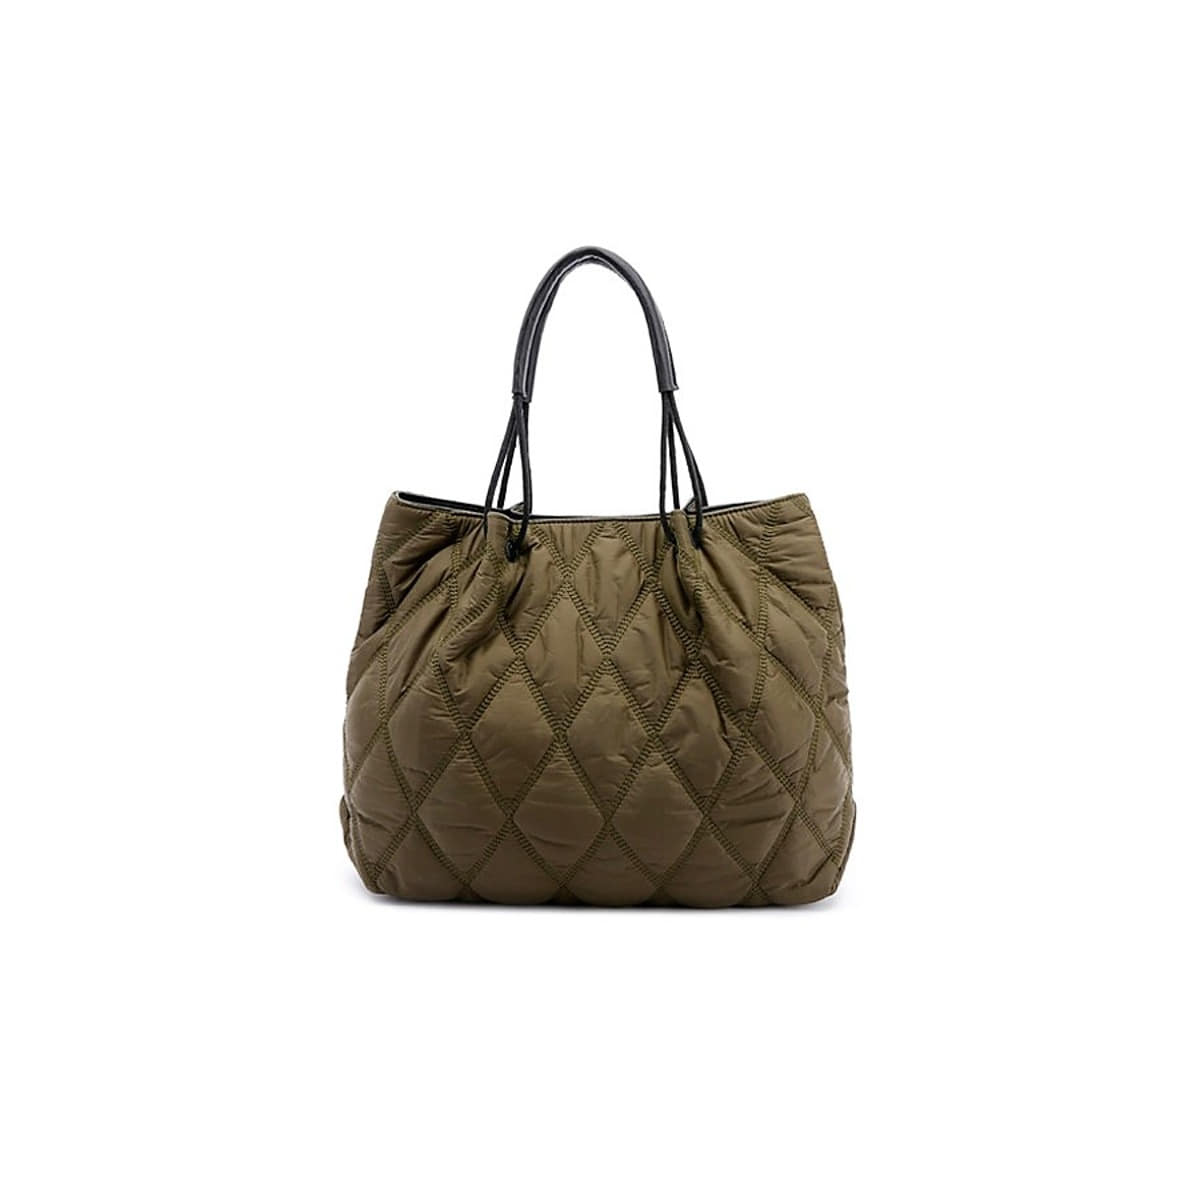 Barbarossa leather strap padded quilted shoulder tote bag